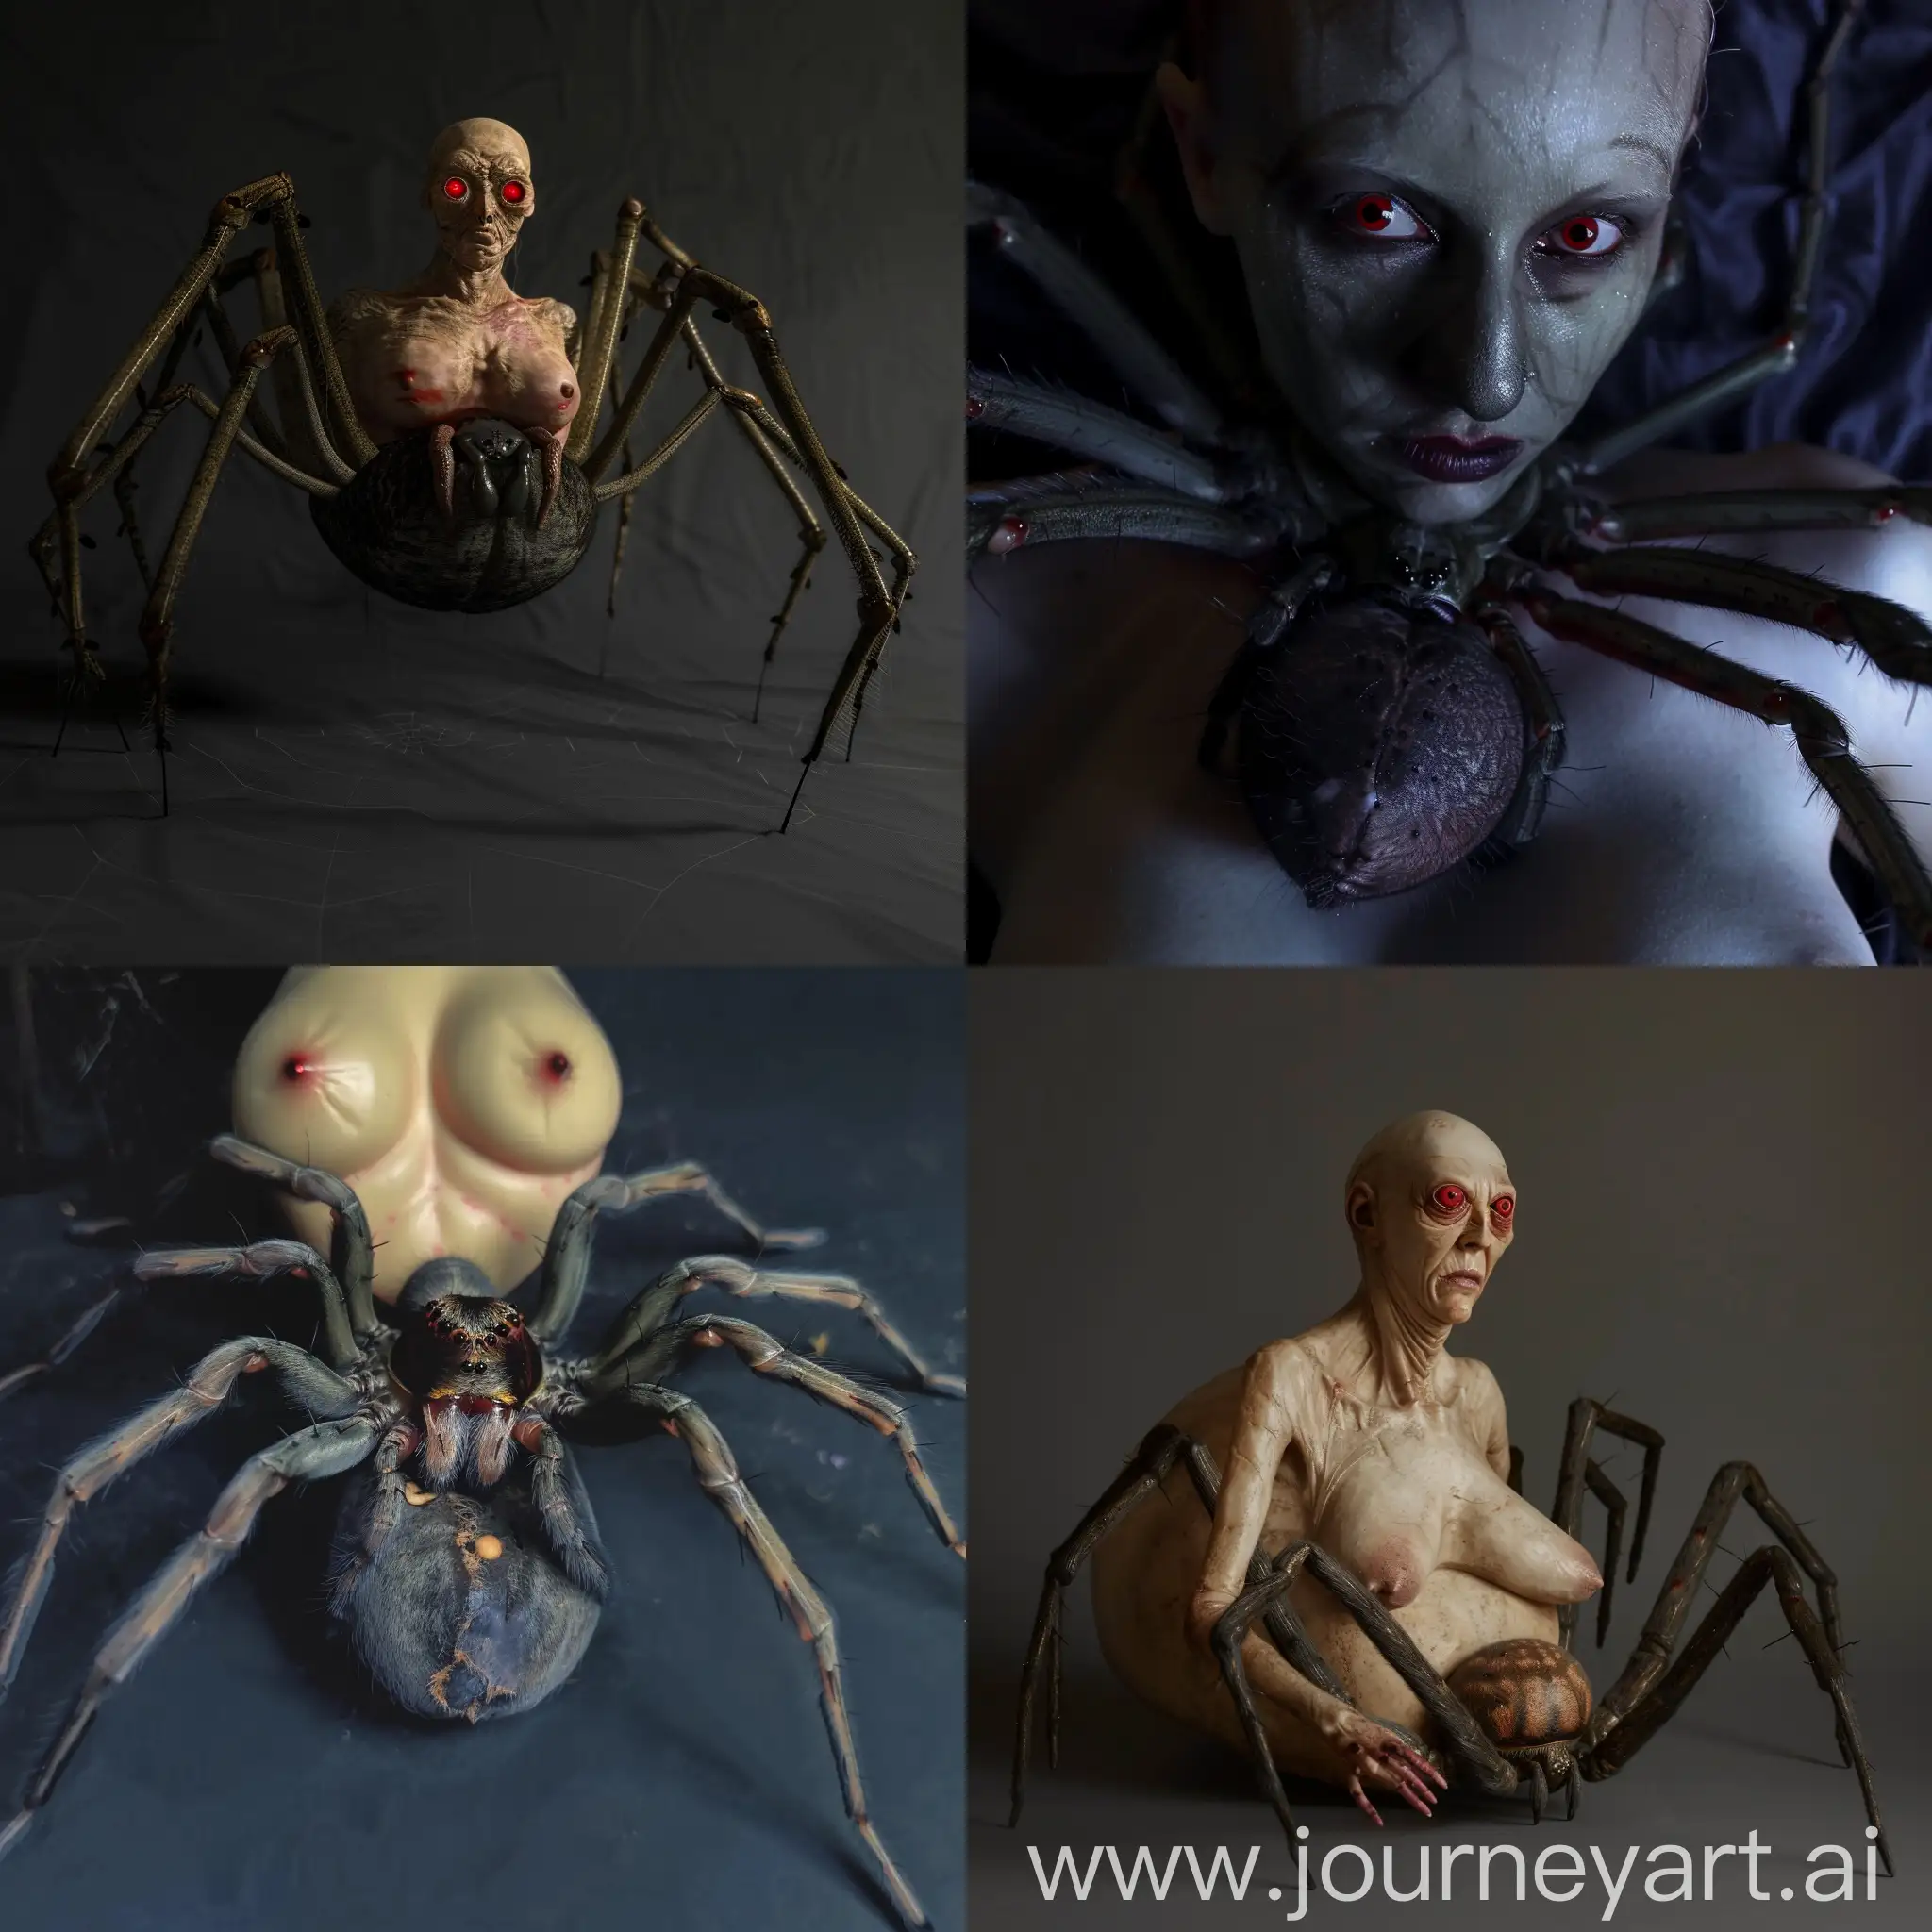 Arachne-the-Spider-Queen-with-Pale-Skin-and-Four-Red-Eyes